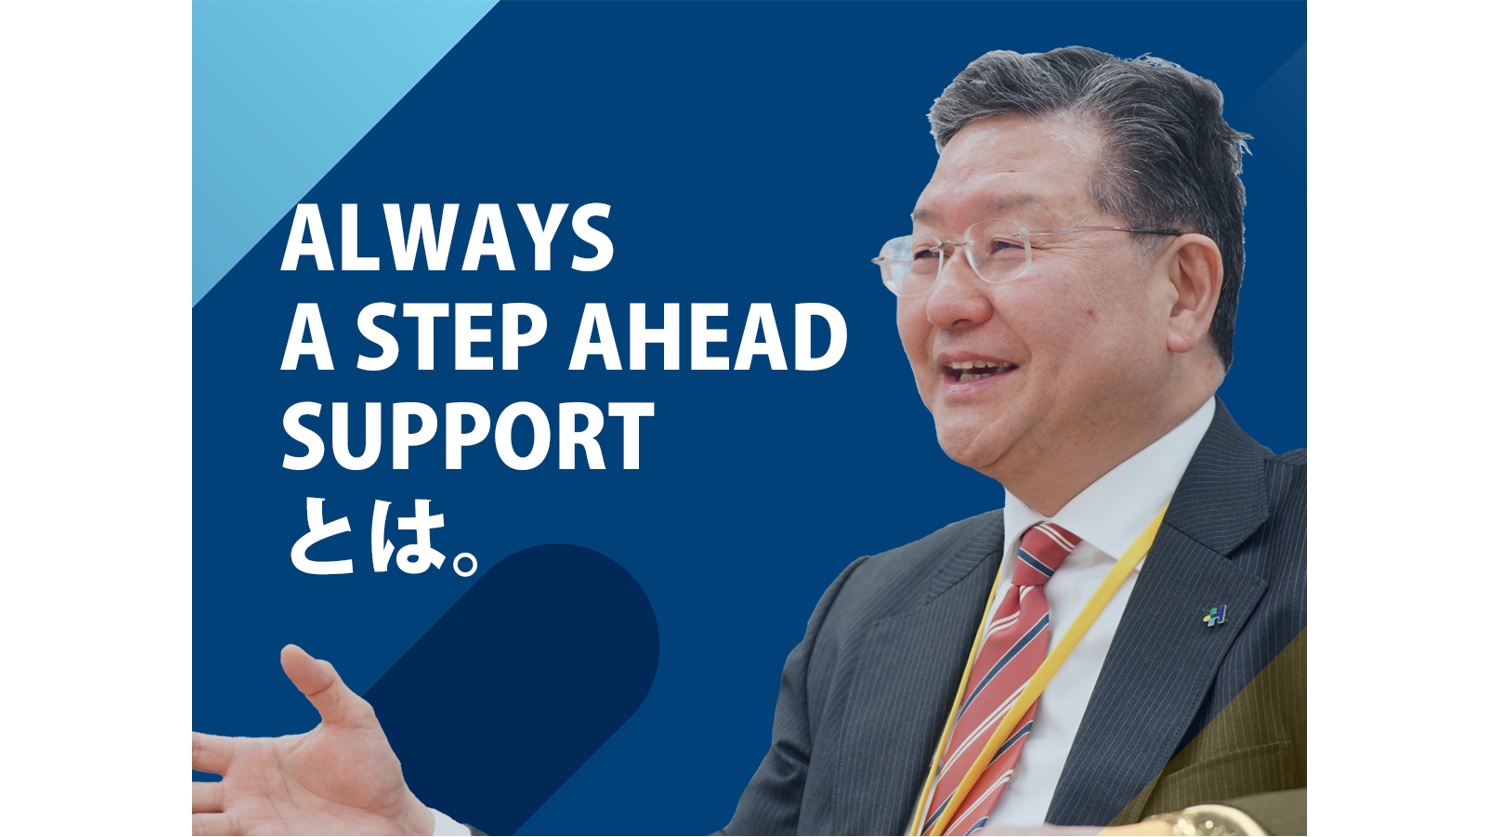 Always A Step Ahead Supportとは何か？